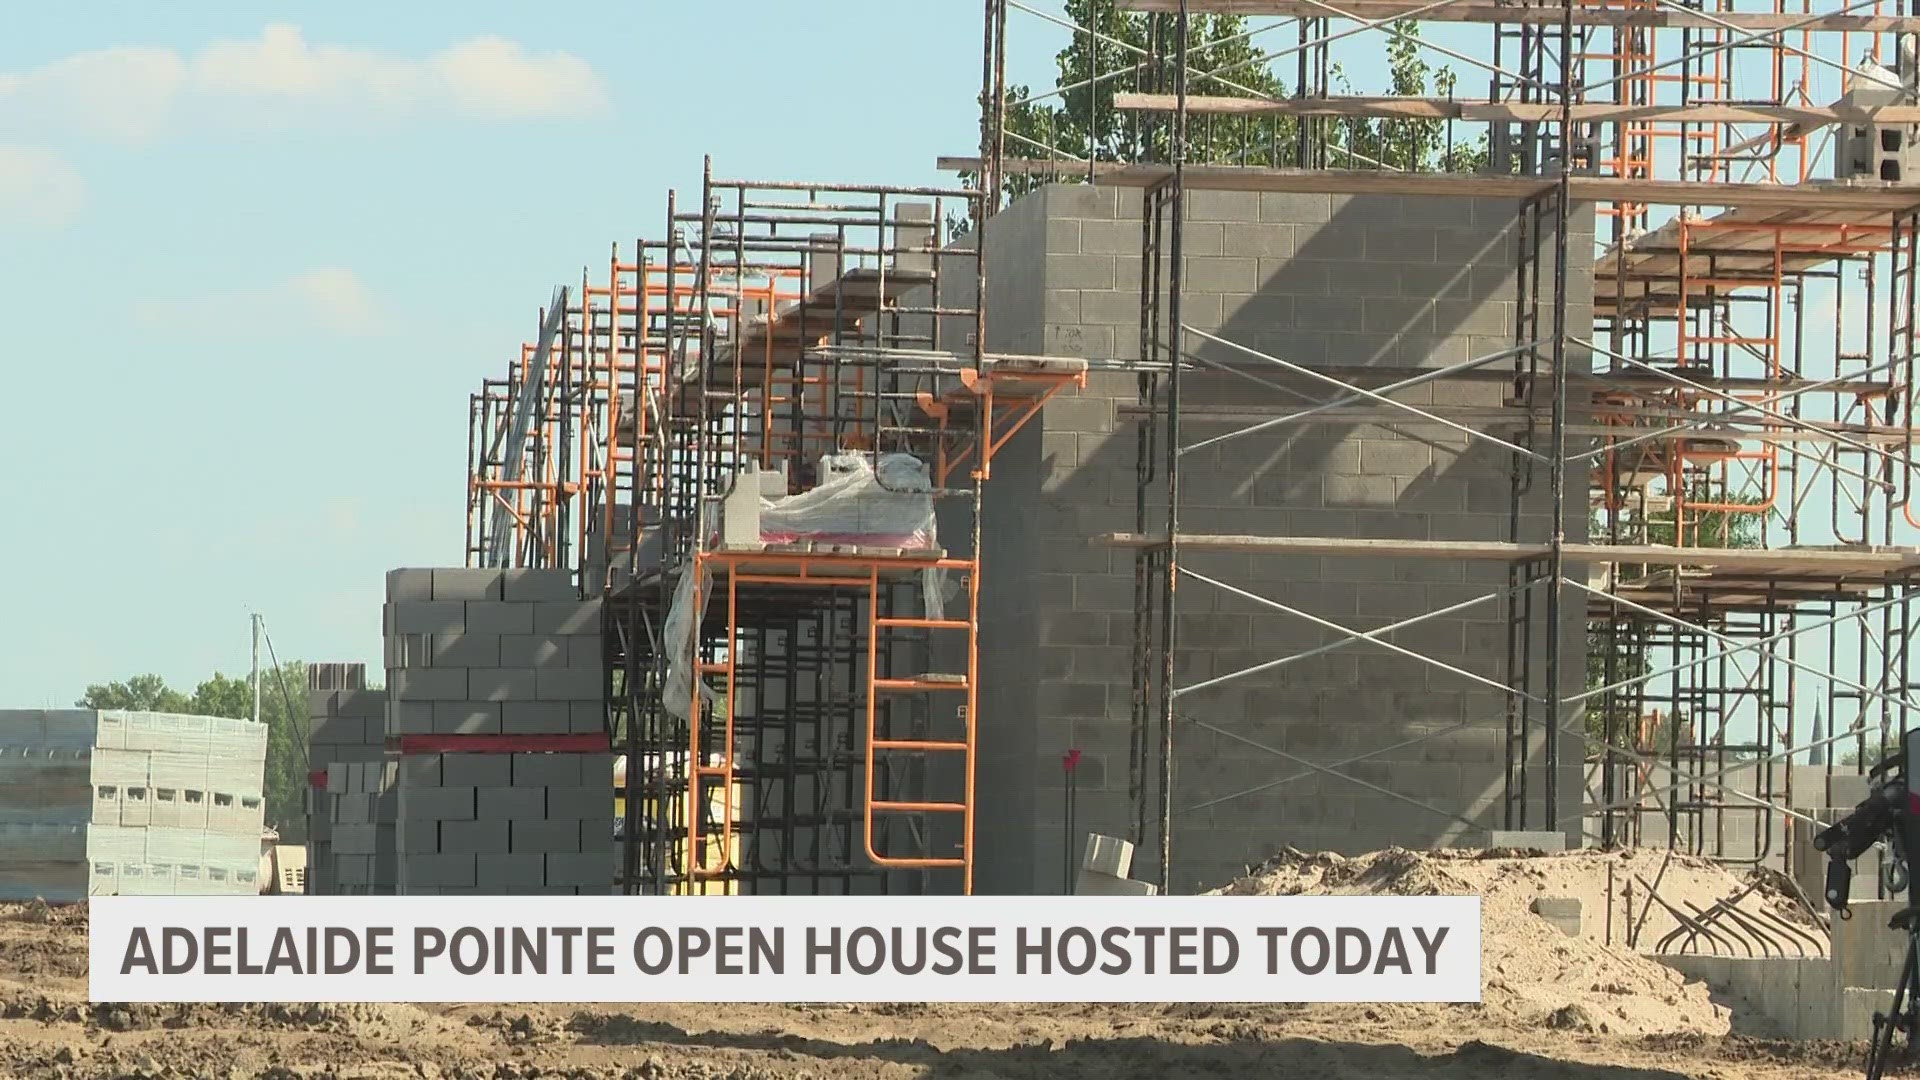 The developers of Adelaide Pointe hosted an open house Friday to give visitors an inside look at the progress.